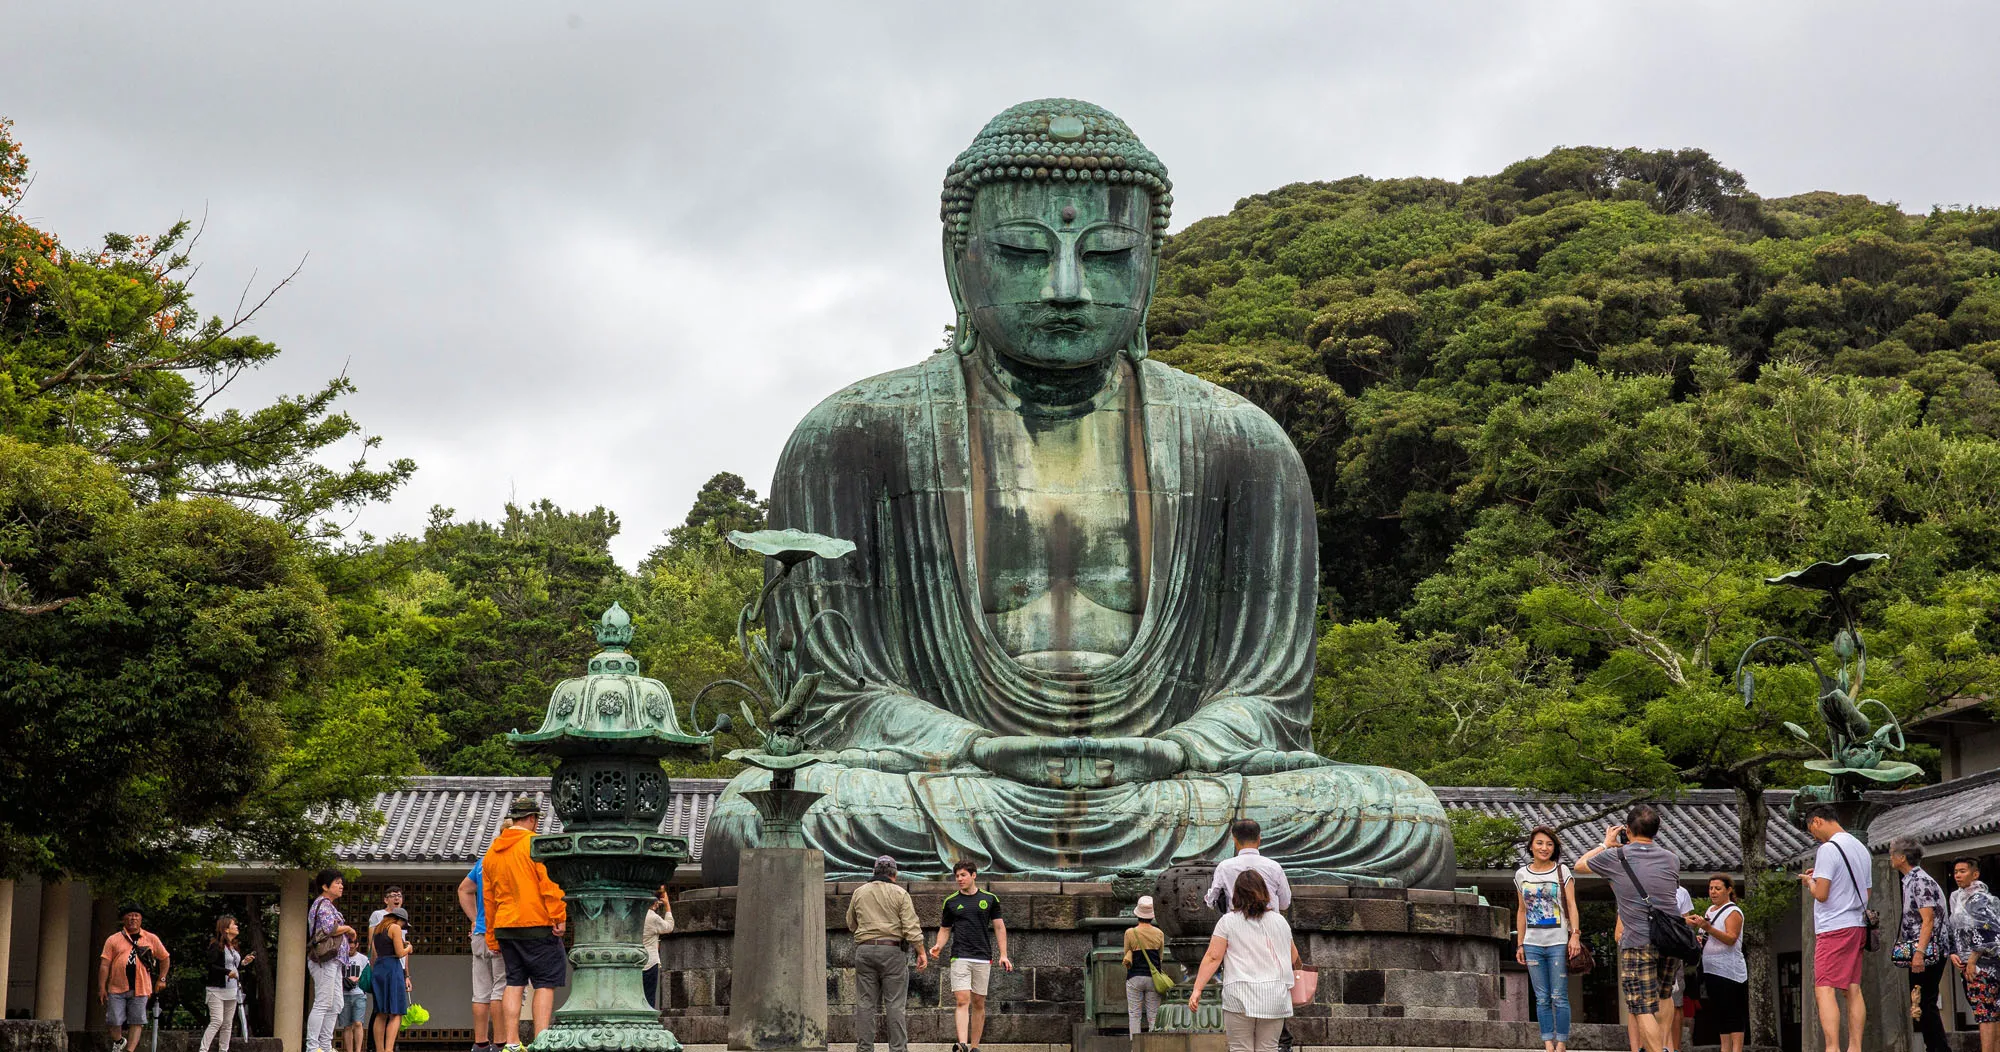 Featured image for “How to Plan a Kamakura Day Trip from Tokyo”